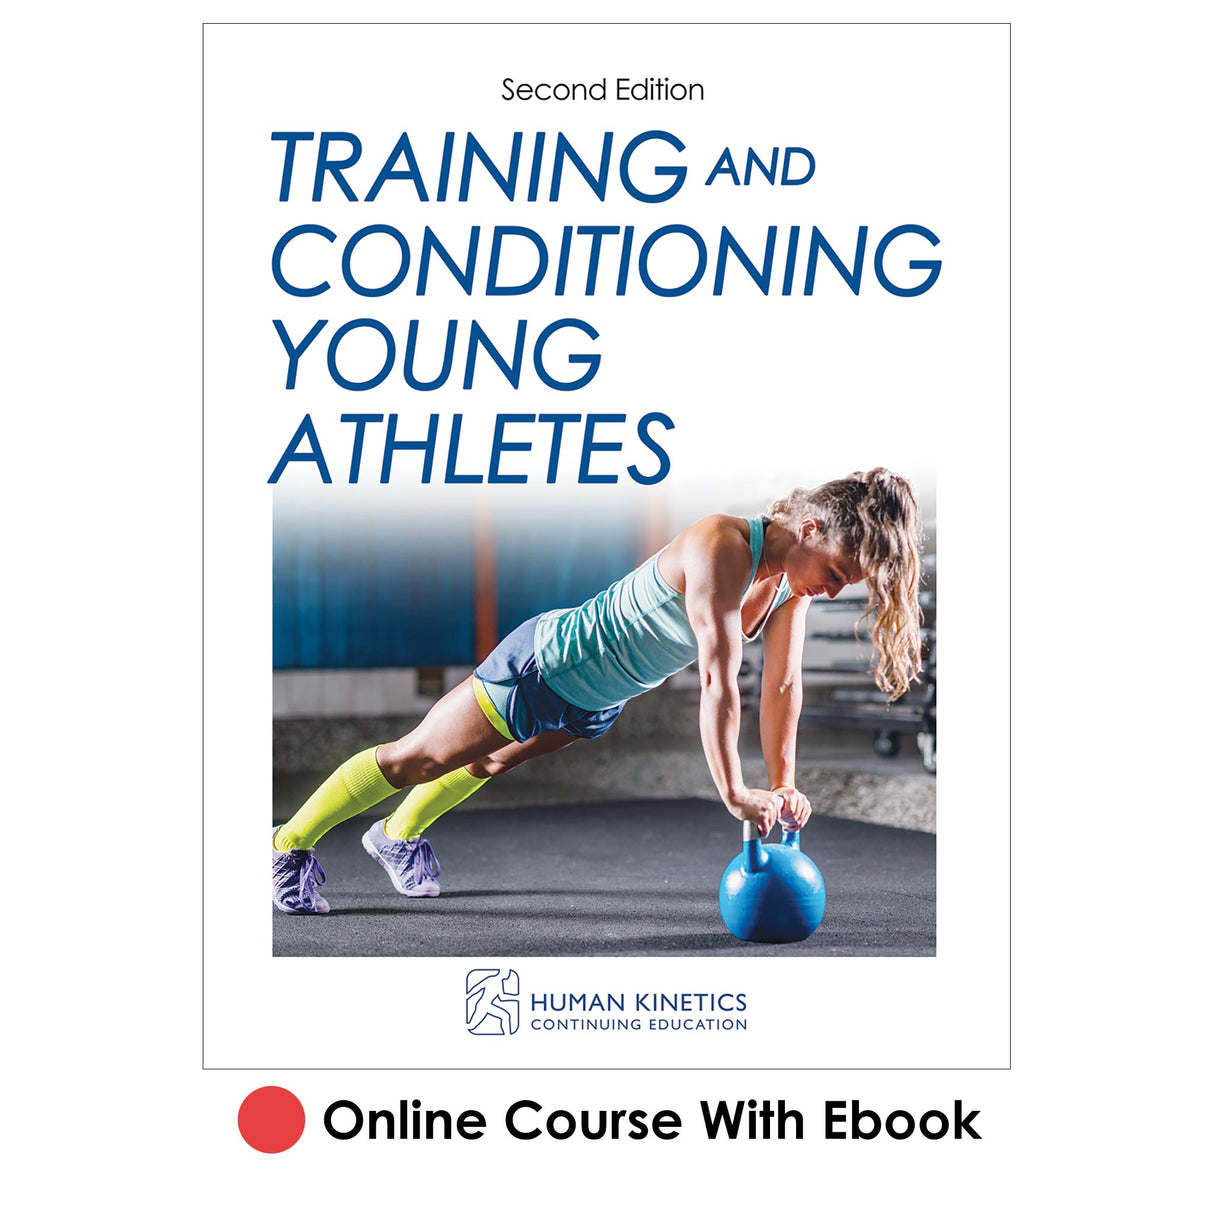 Training and Conditioning Young Athletes 2nd Edition Online CE Course With Ebook